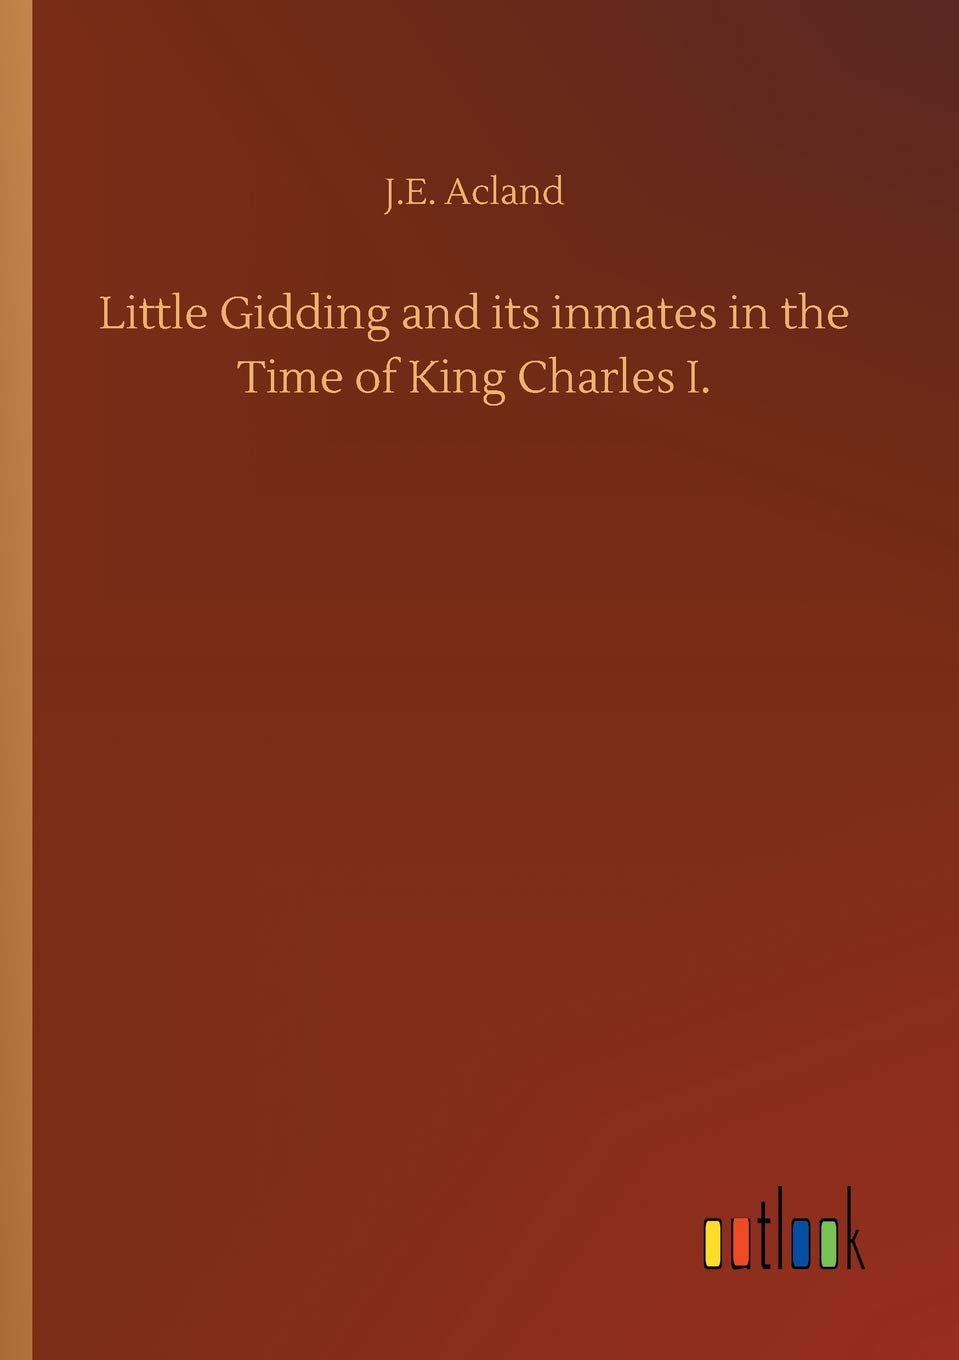 Little Gidding and its inmates in the Time of King Charles